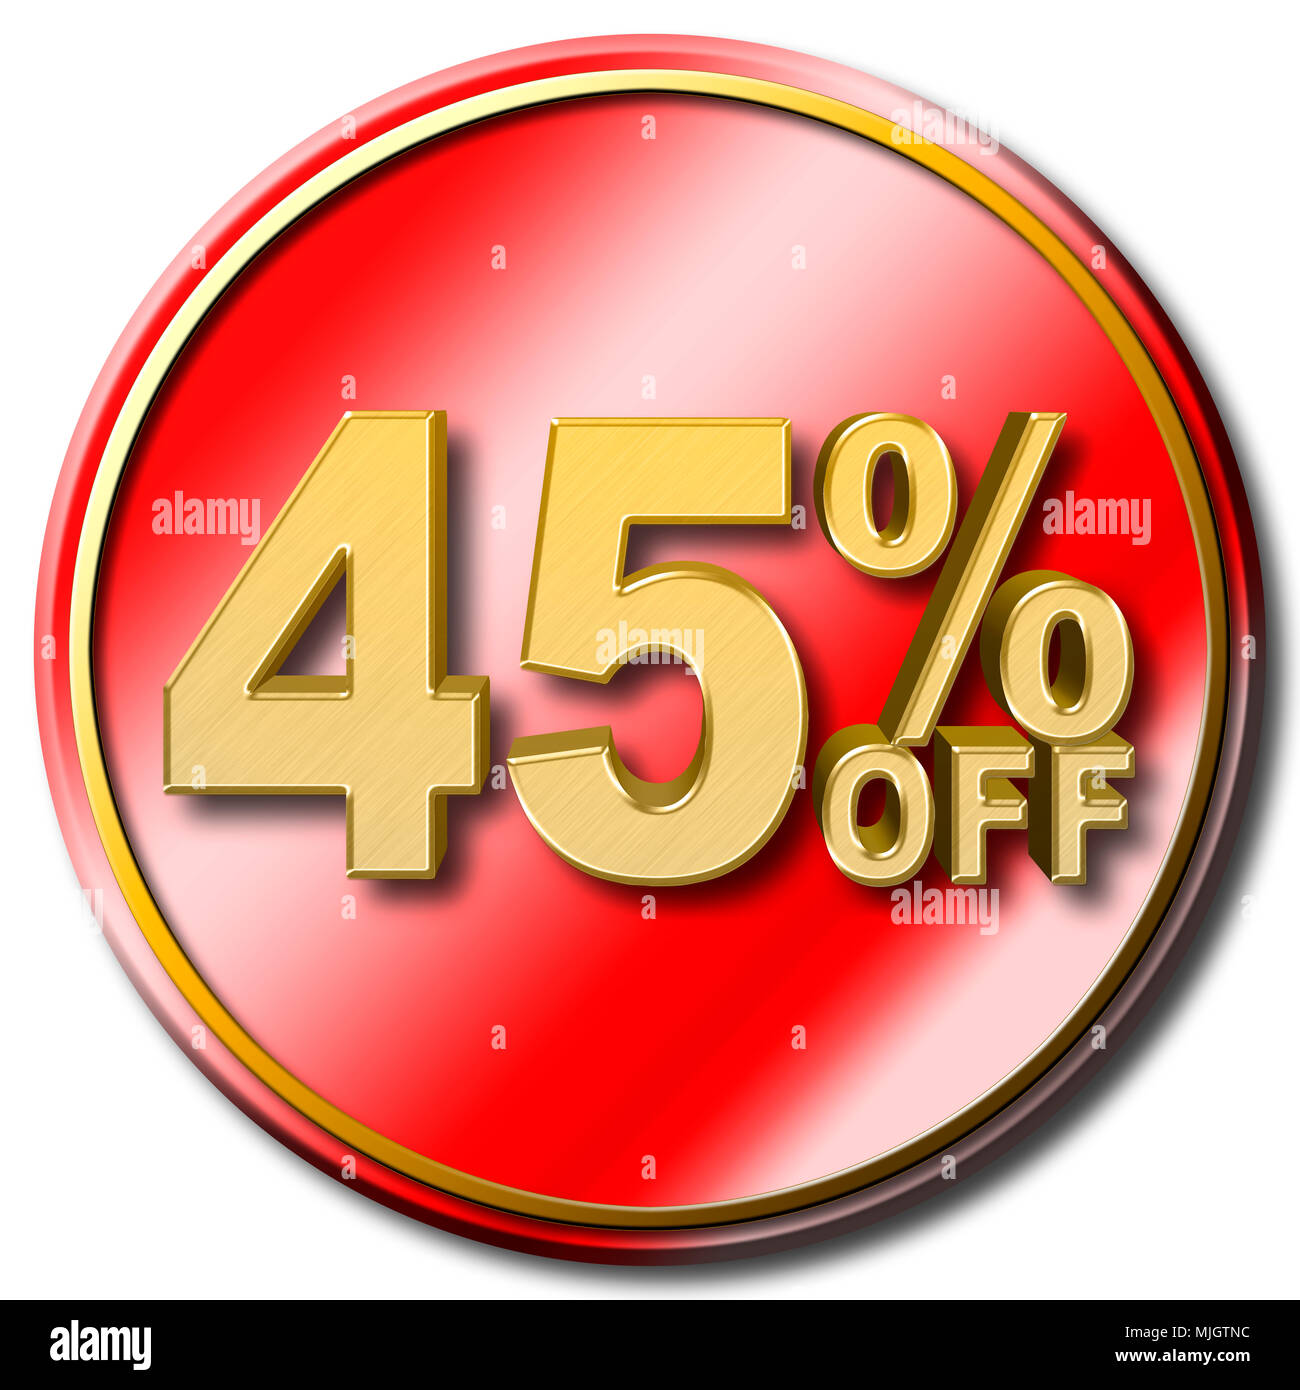 Stock Illustration - Large Golden Text: 45 Percent Off, Sale, Golden Numbers, 3D Illustration, White Background. Stock Photo